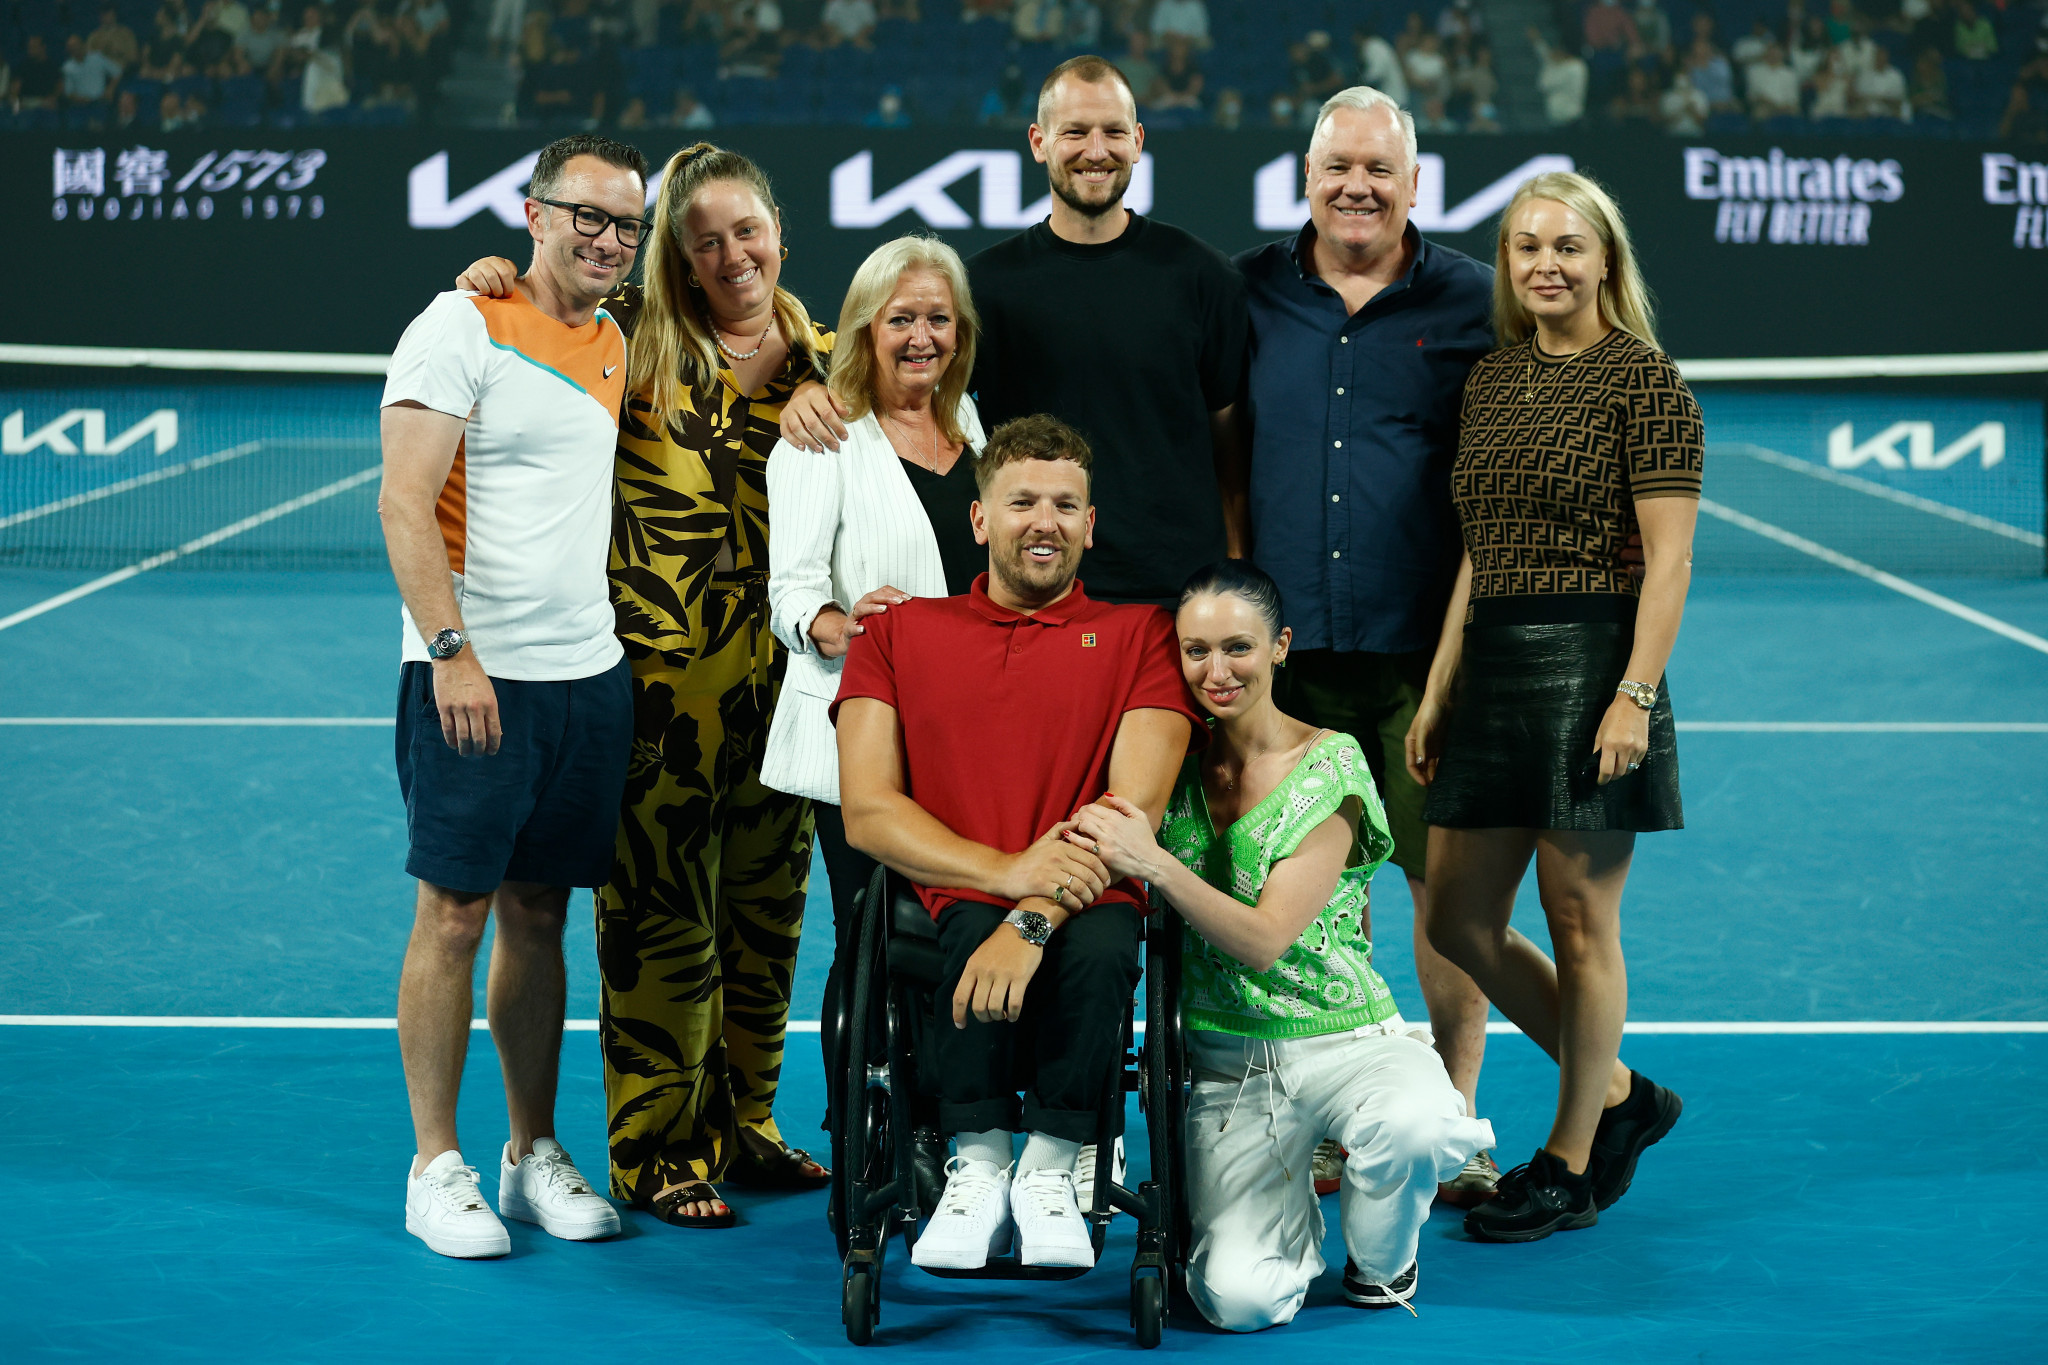 Australian wheelchair tennis star Dylan Alcott, who retired from the sport yesterday, parades with his family on the Rod Laver Arena before today's night session ©Getty Images